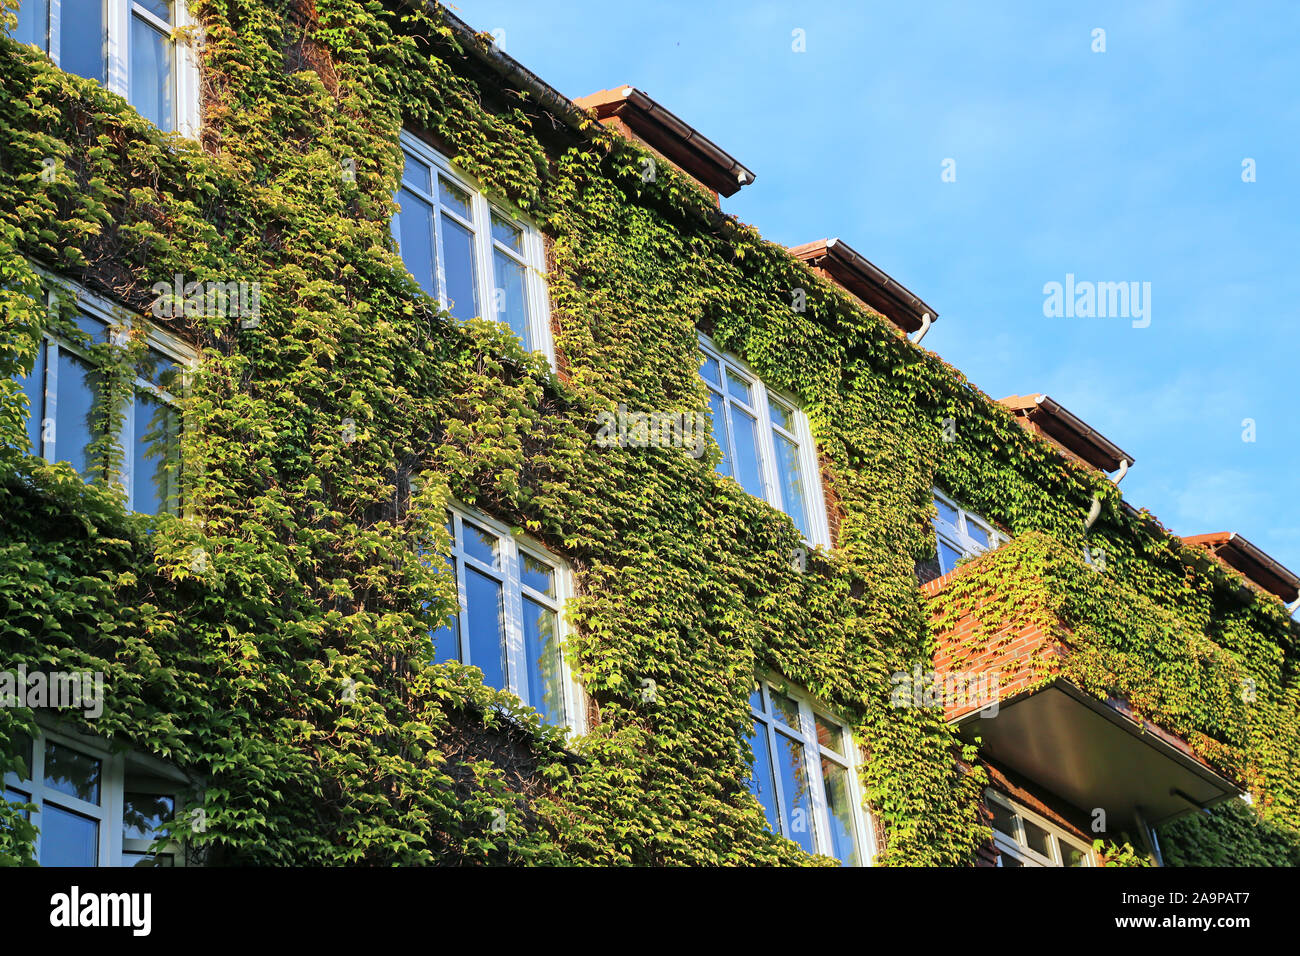 facade of apartment house with climbing plants Stock Photo